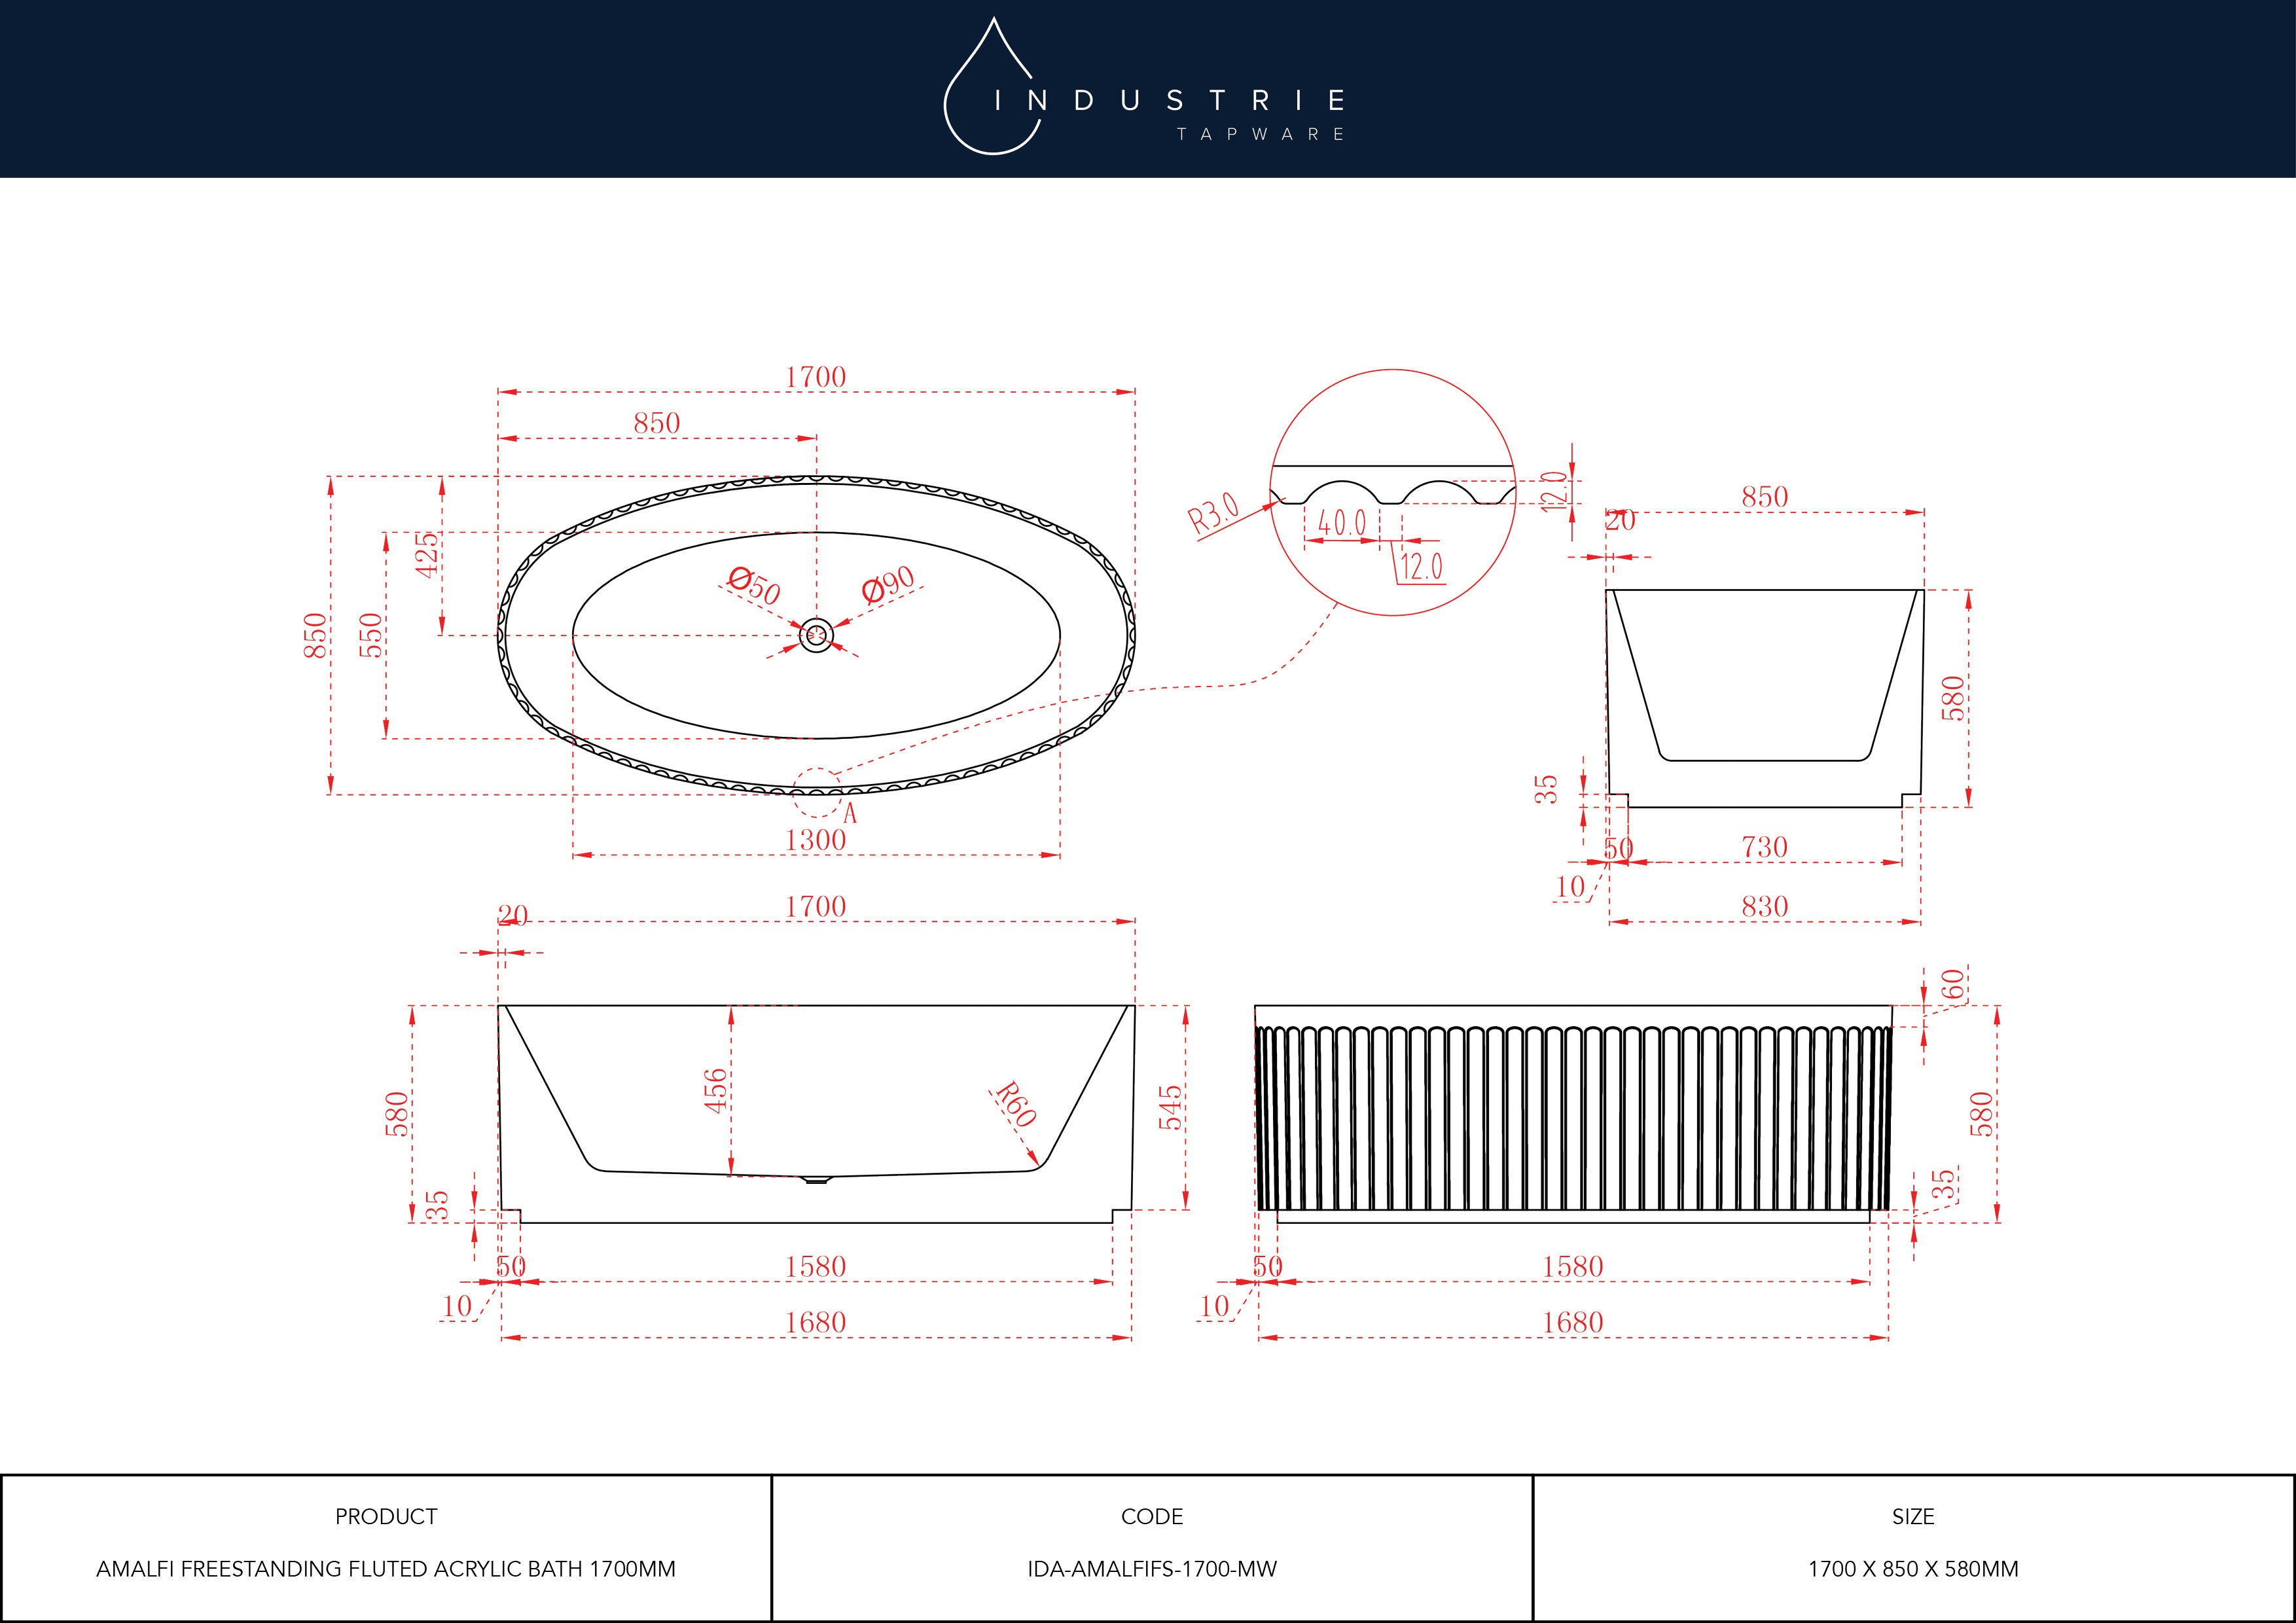 Specification sheet for Amalfi Freestanding Bathtub showing dimensions and design details